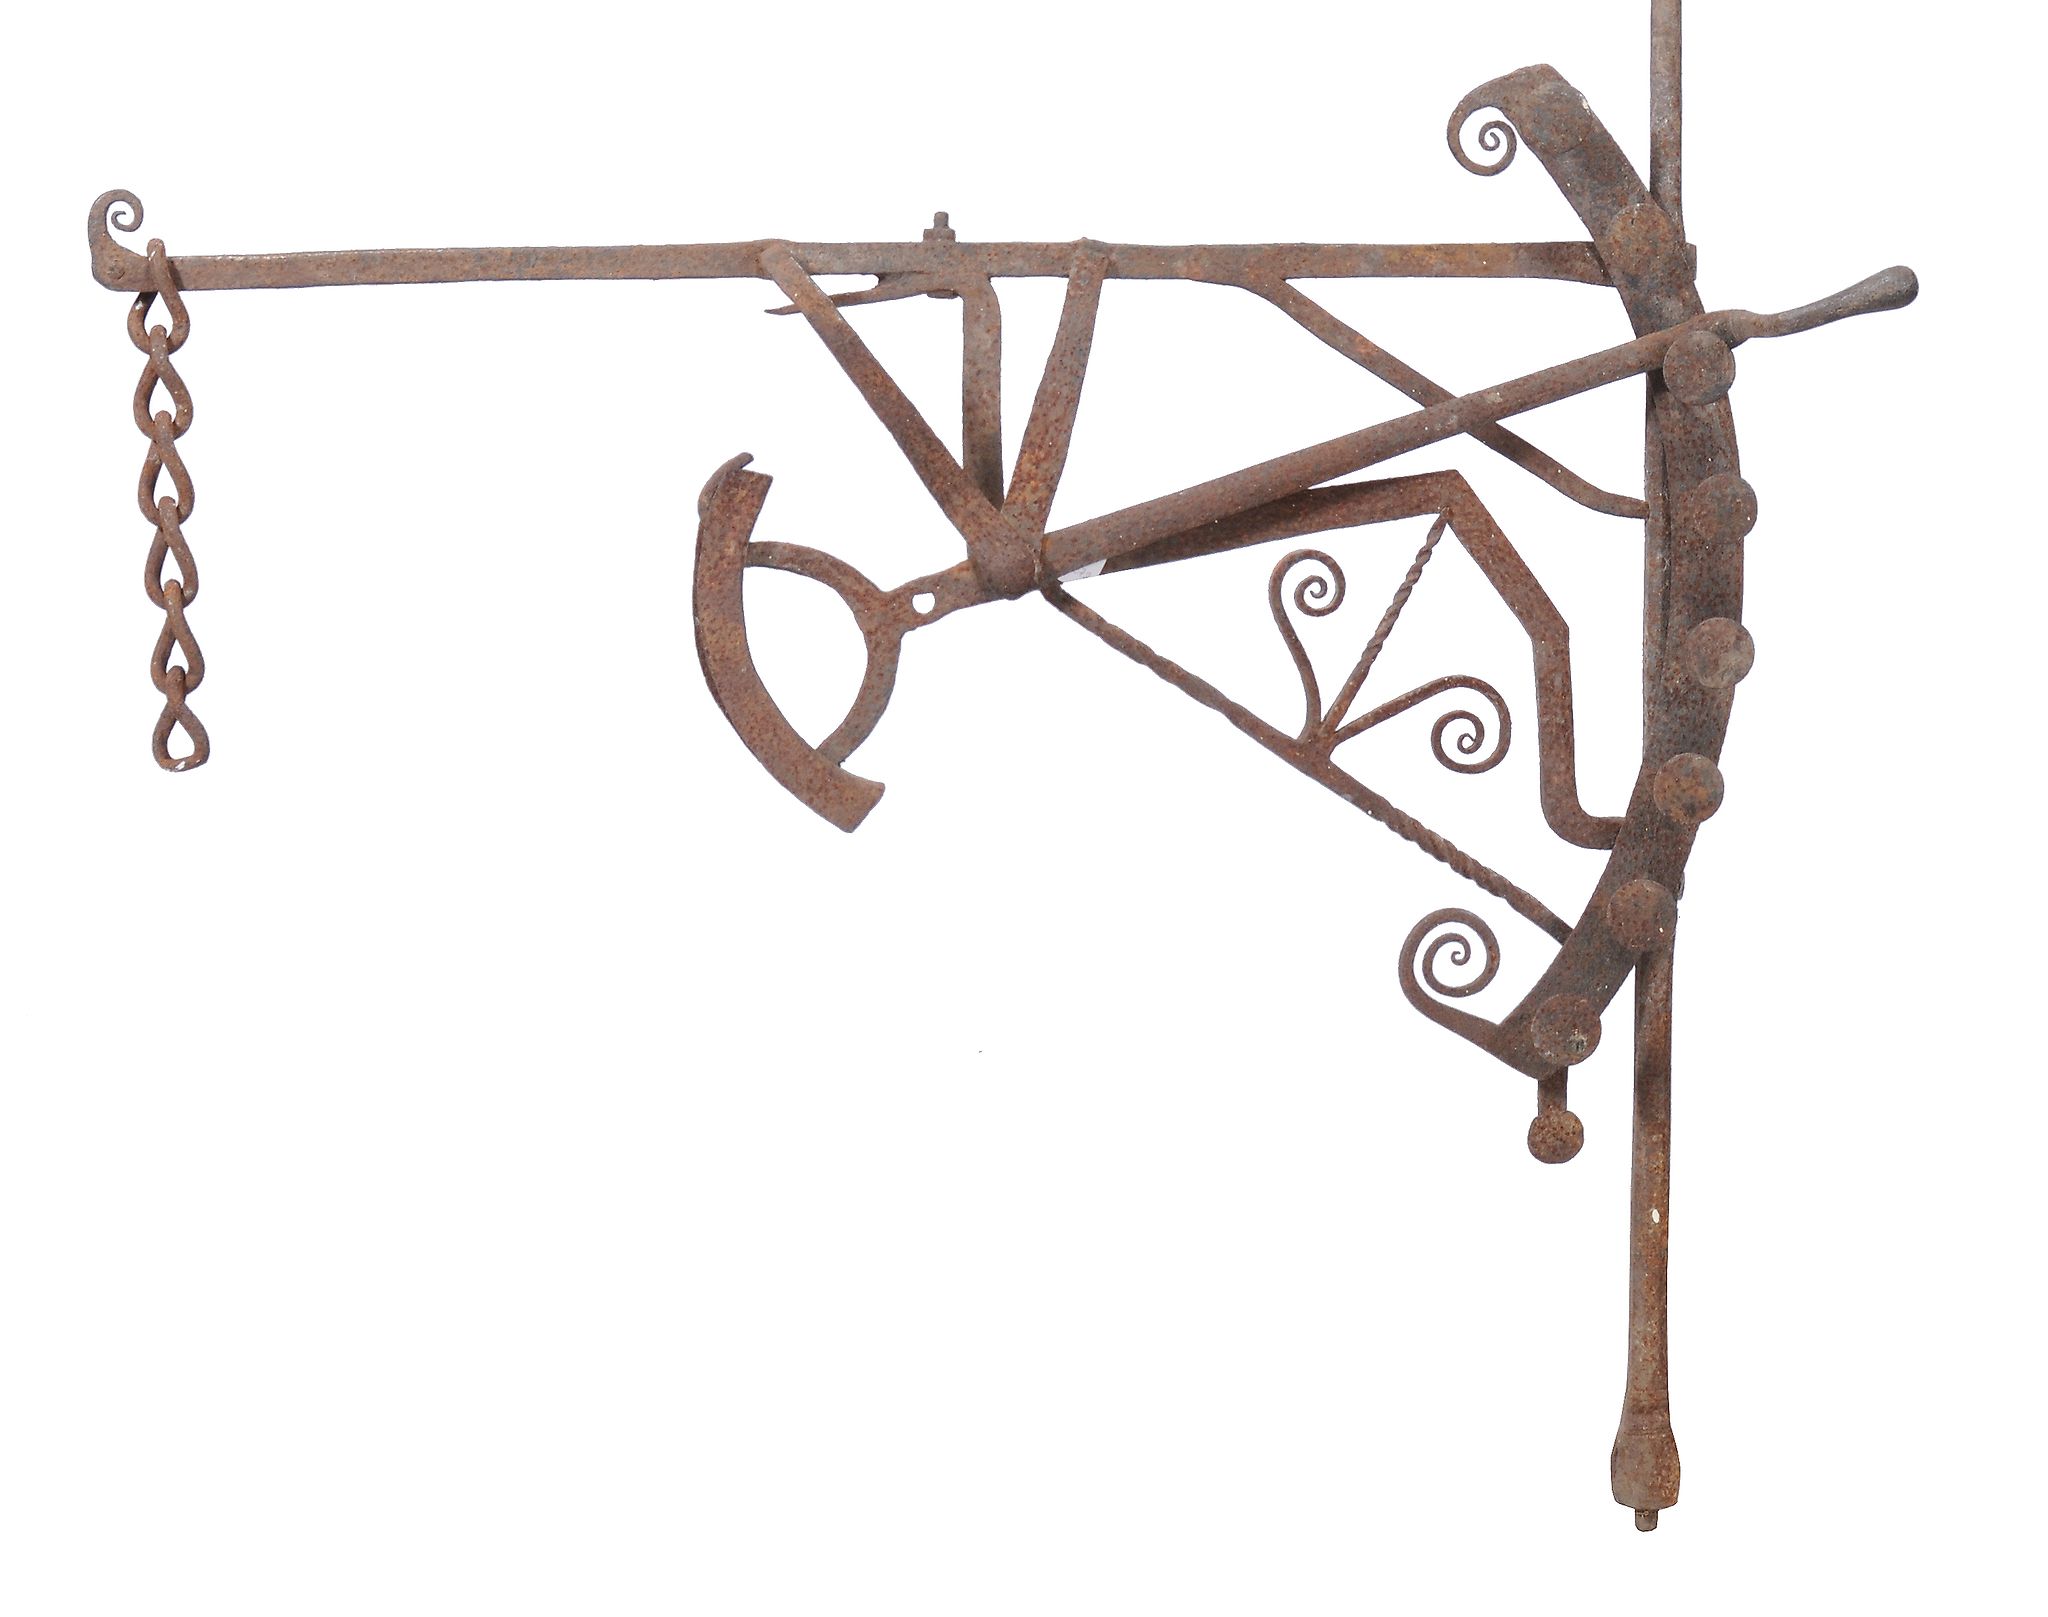 A Jacobean adjustable wrought iron chimney crane, late 17th century, with scrolled finials and - Image 3 of 3